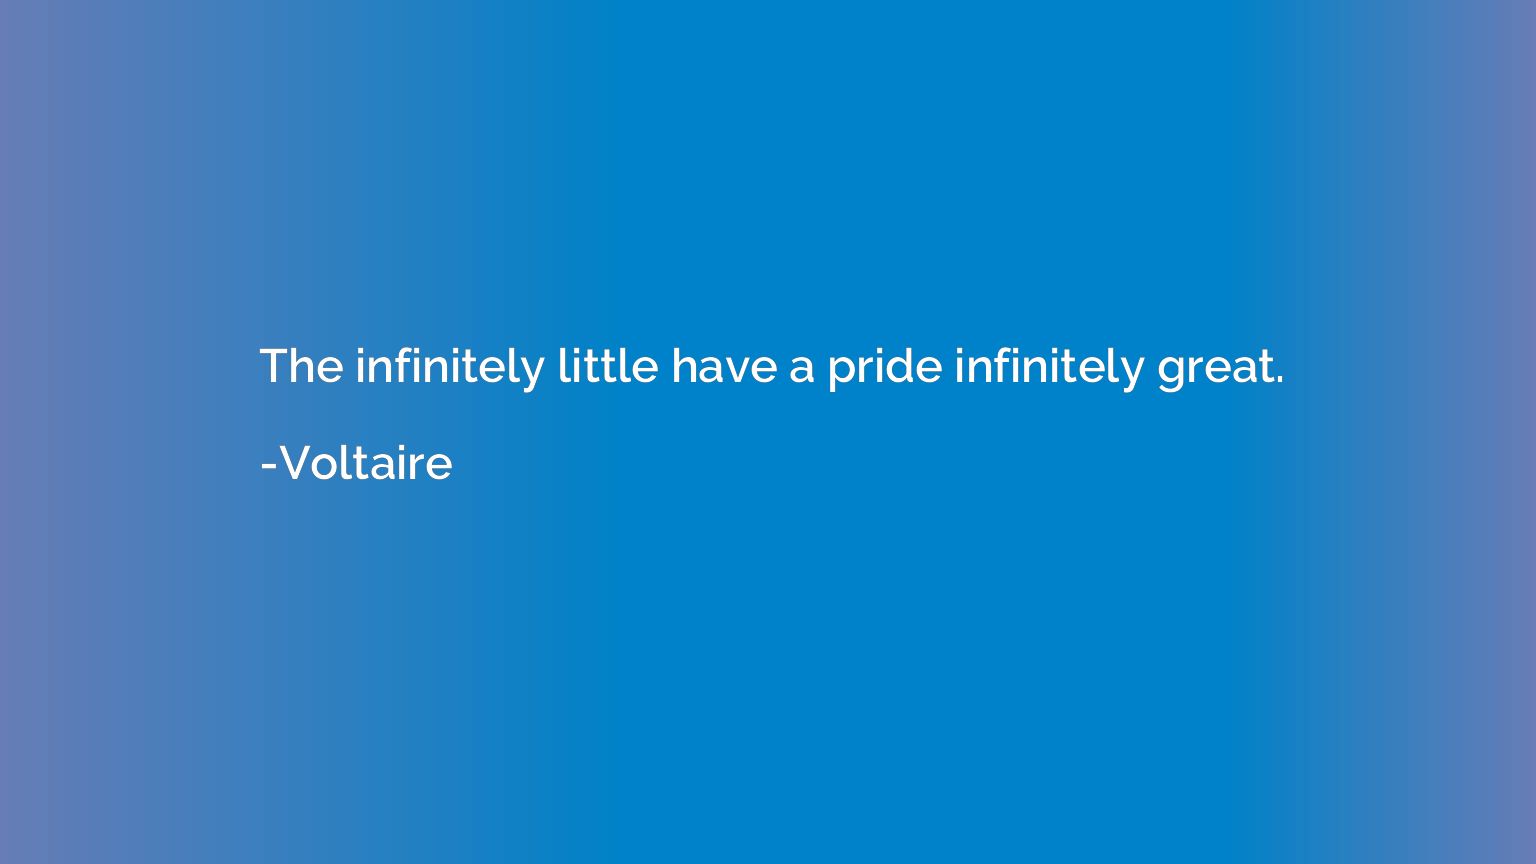 The infinitely little have a pride infinitely great.